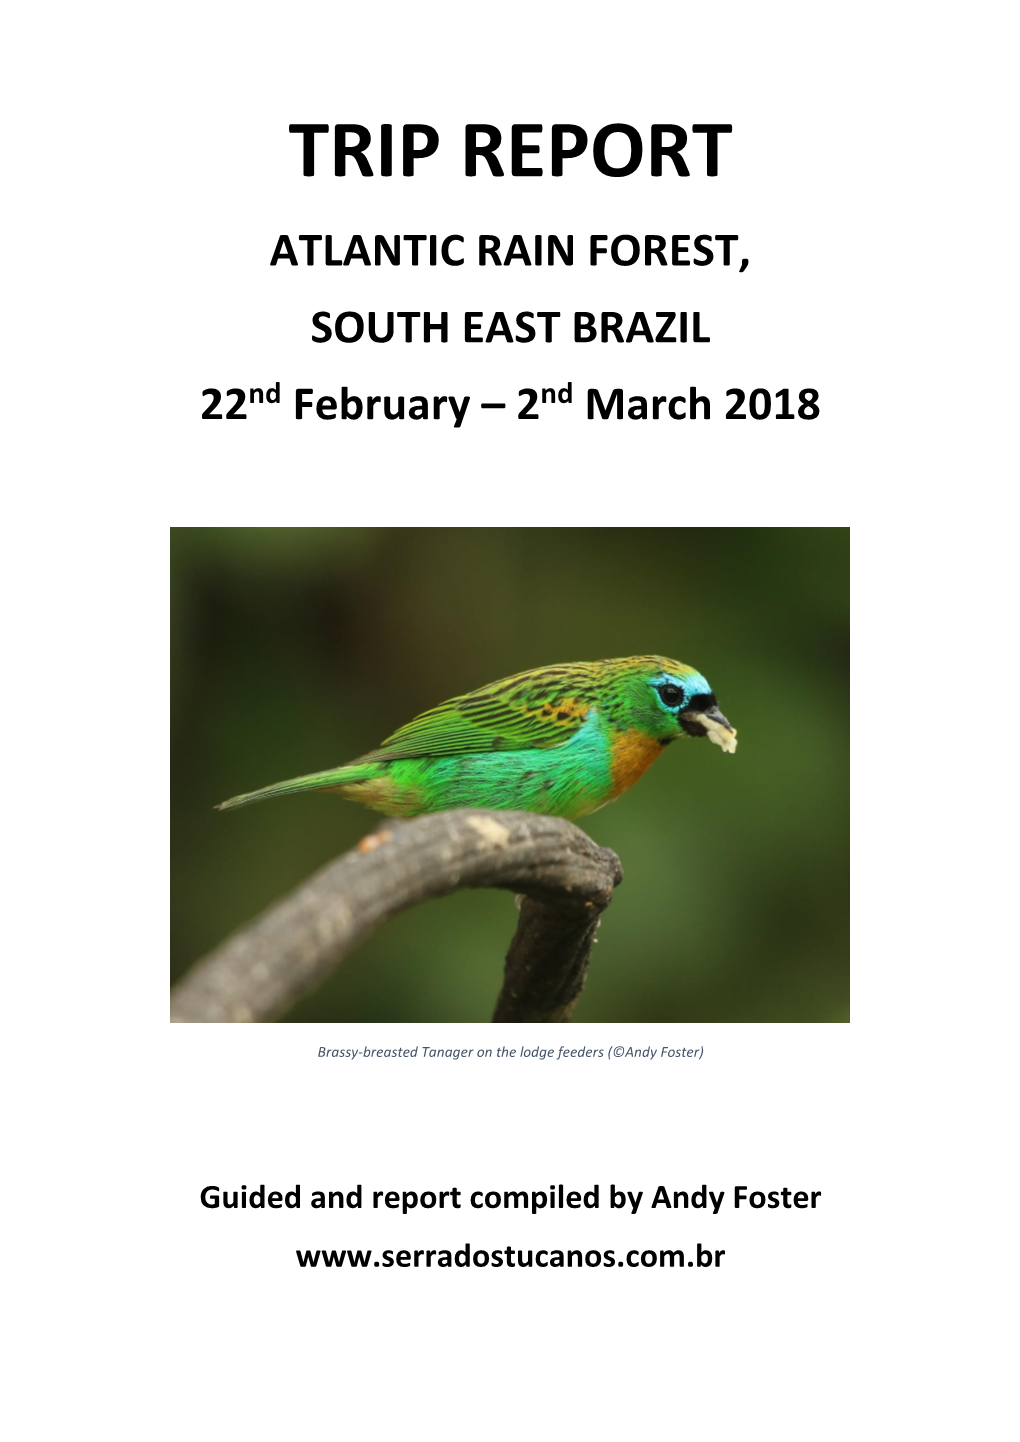 TRIP REPORT ATLANTIC RAIN FOREST, SOUTH EAST BRAZIL 22Nd February – 2Nd March 2018